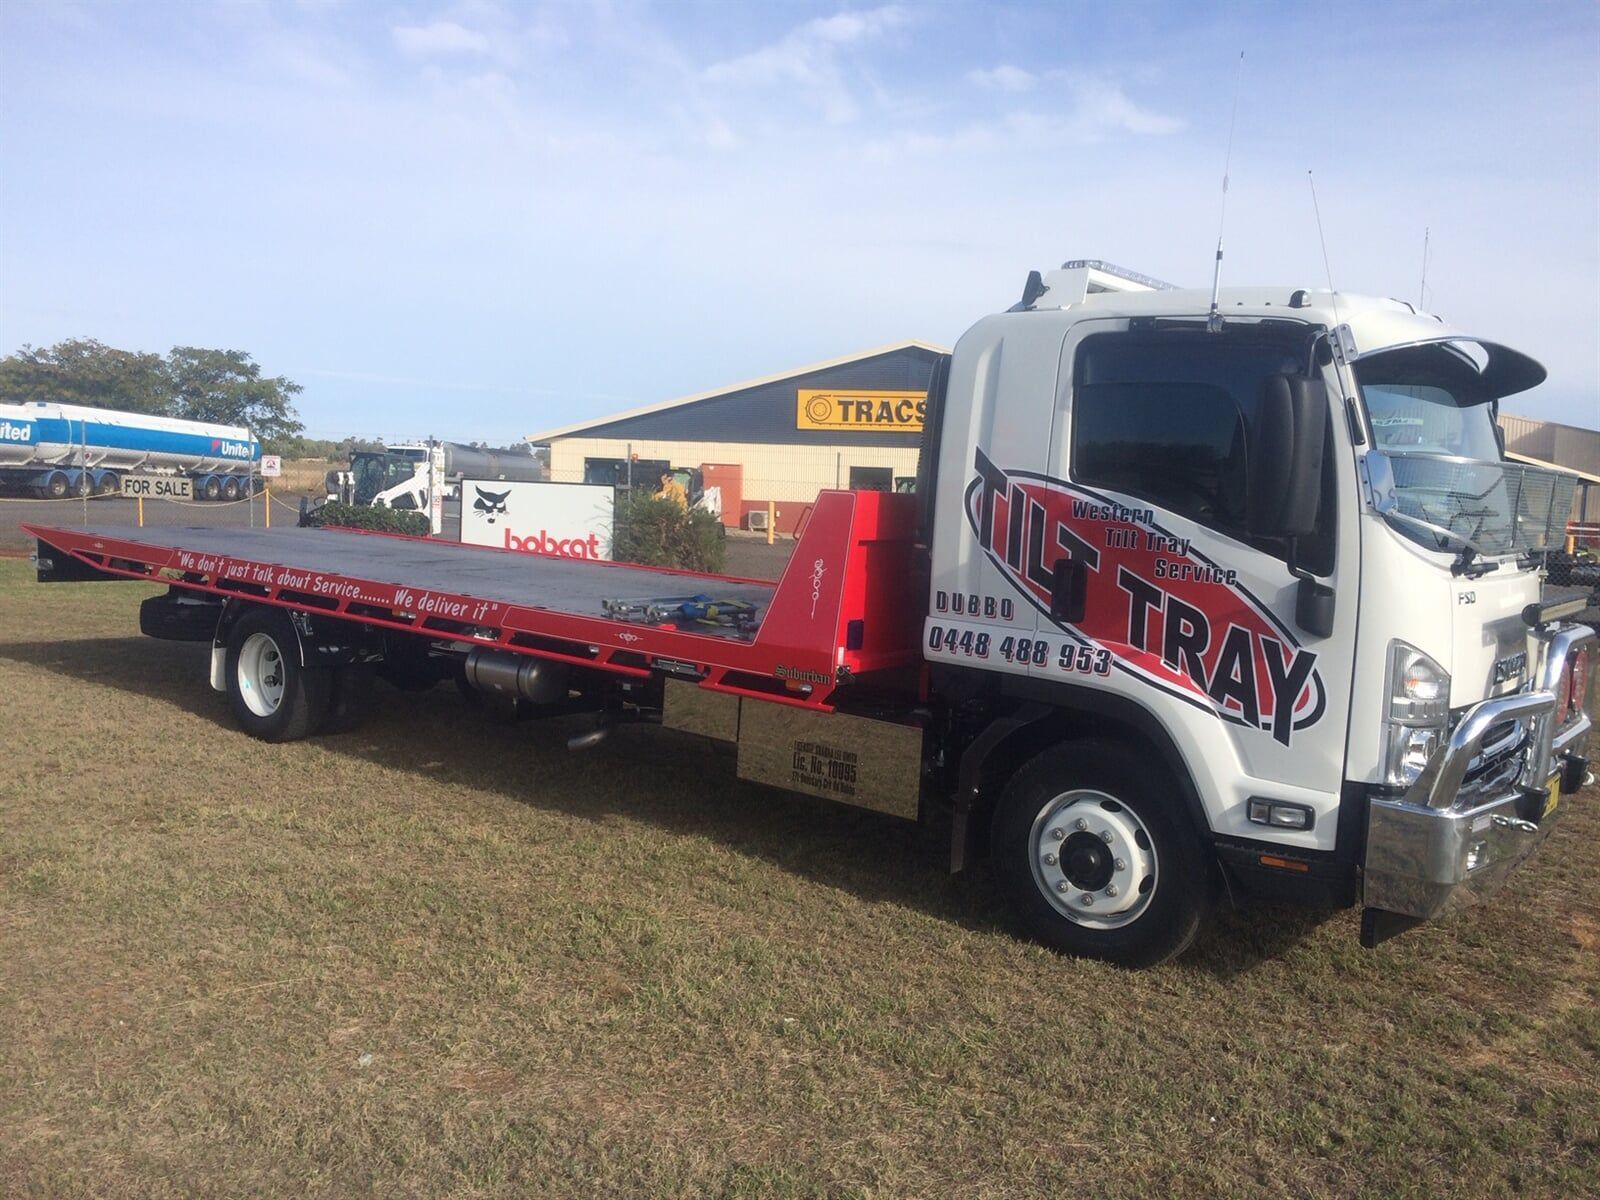 Tow truck parked on grass — Towing in Dubbo, NSW